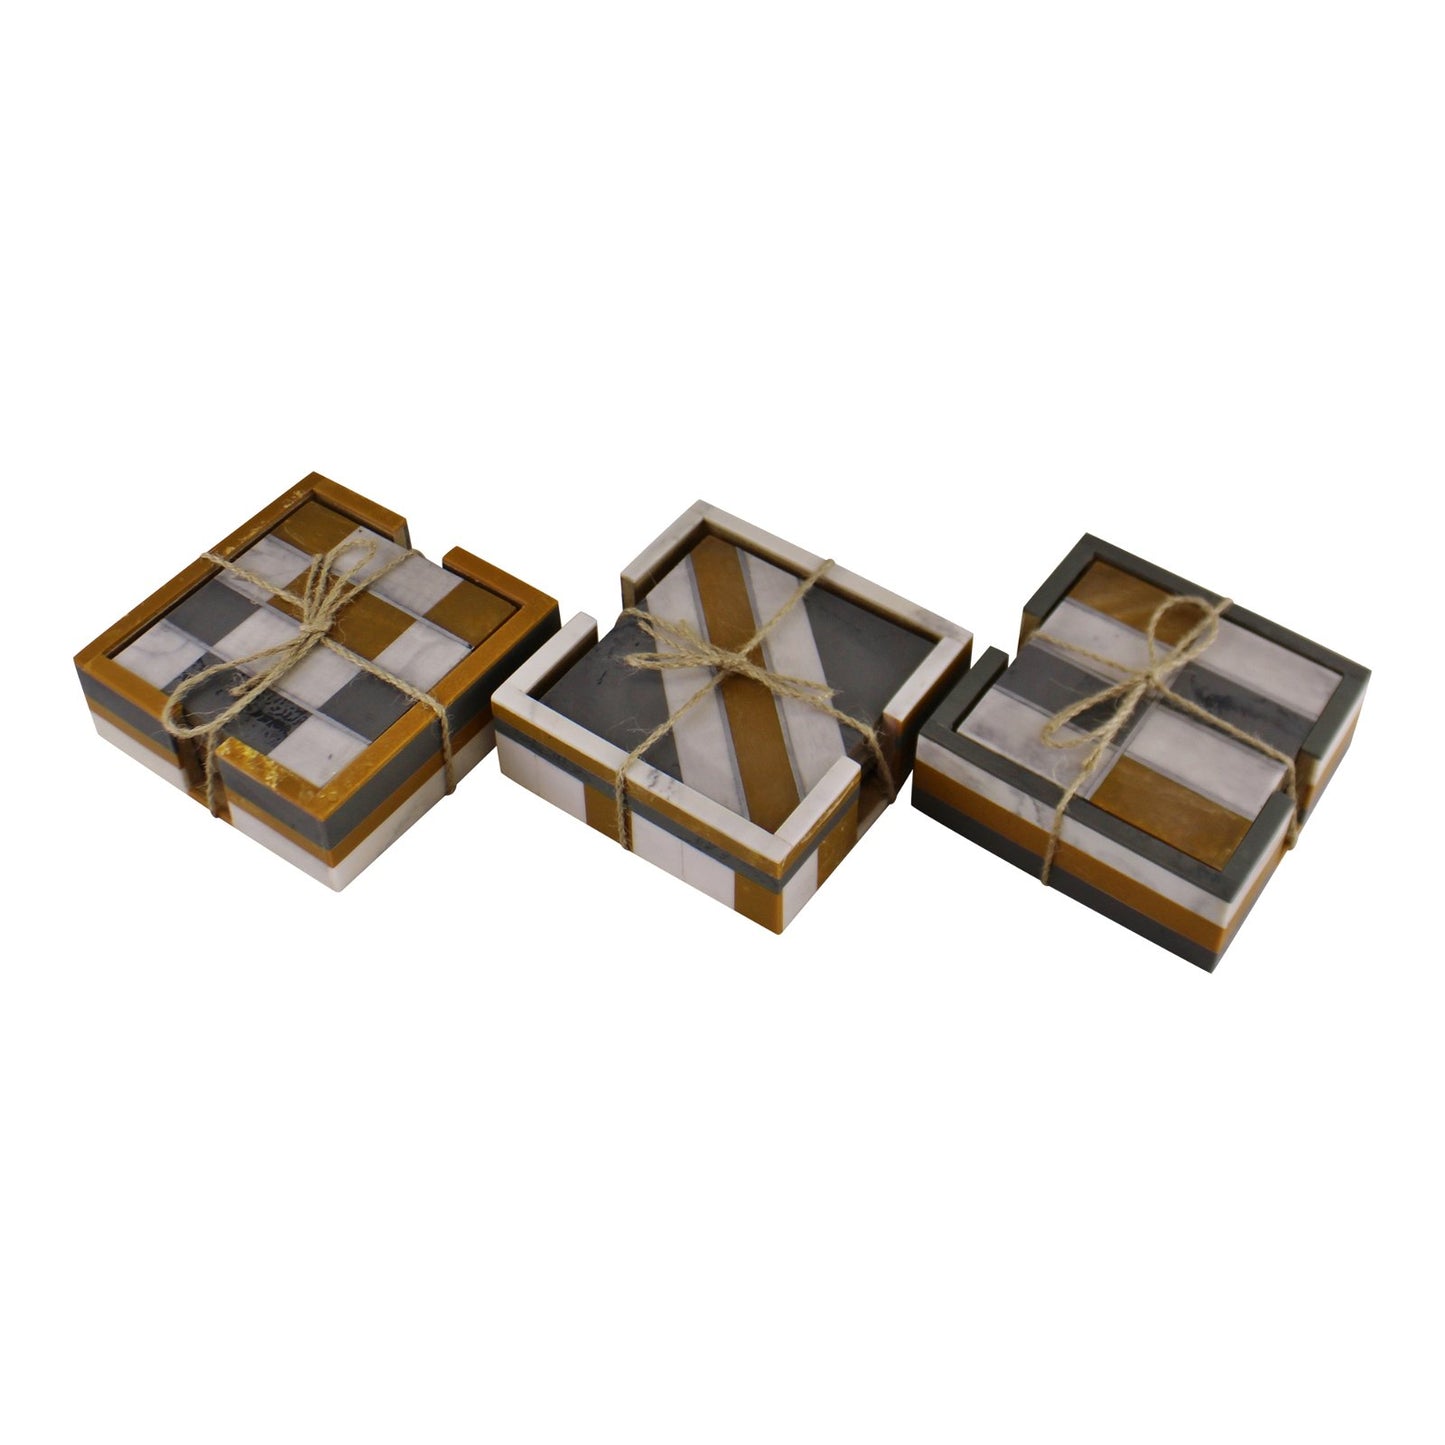 Set of 4 Square, Resin Coasters, Abstract Design - Kaftan direct